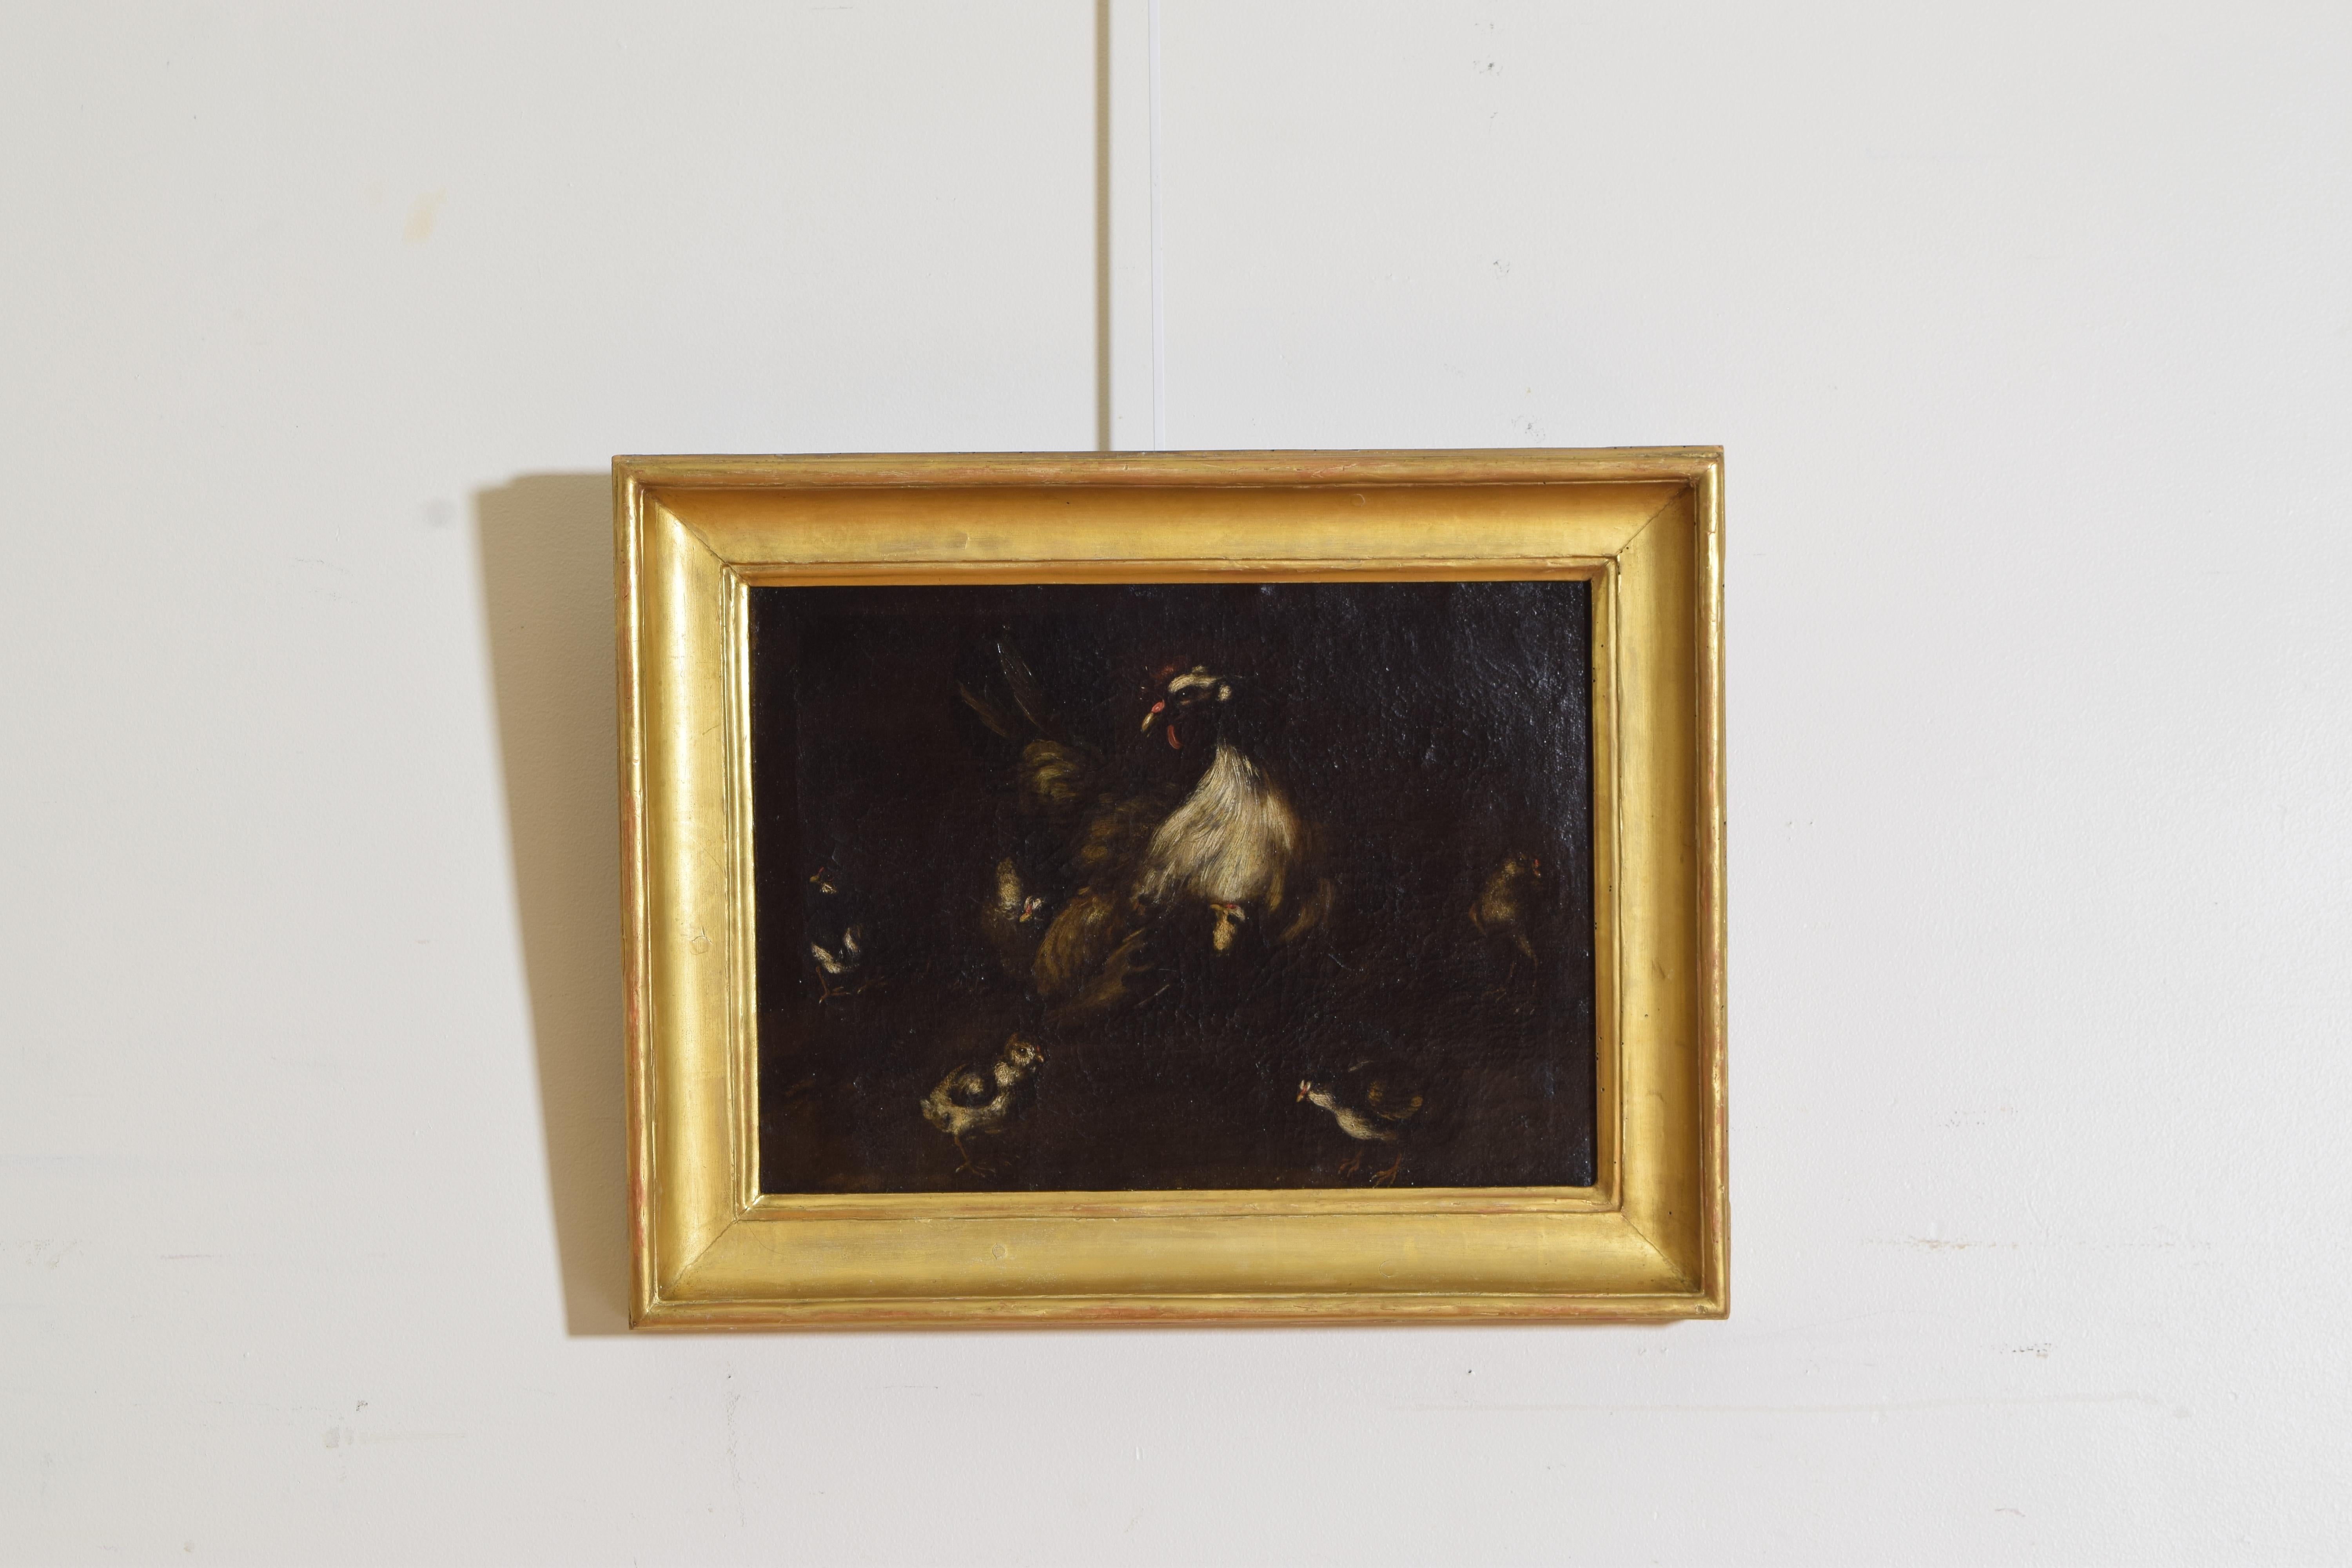 From the Emilia Romagna school of painting this is a depiction of a mother hen protecting her chicks, the period giltwood frame in perfect condition and retaining a paper label at top with a nearly illegible inventory number.